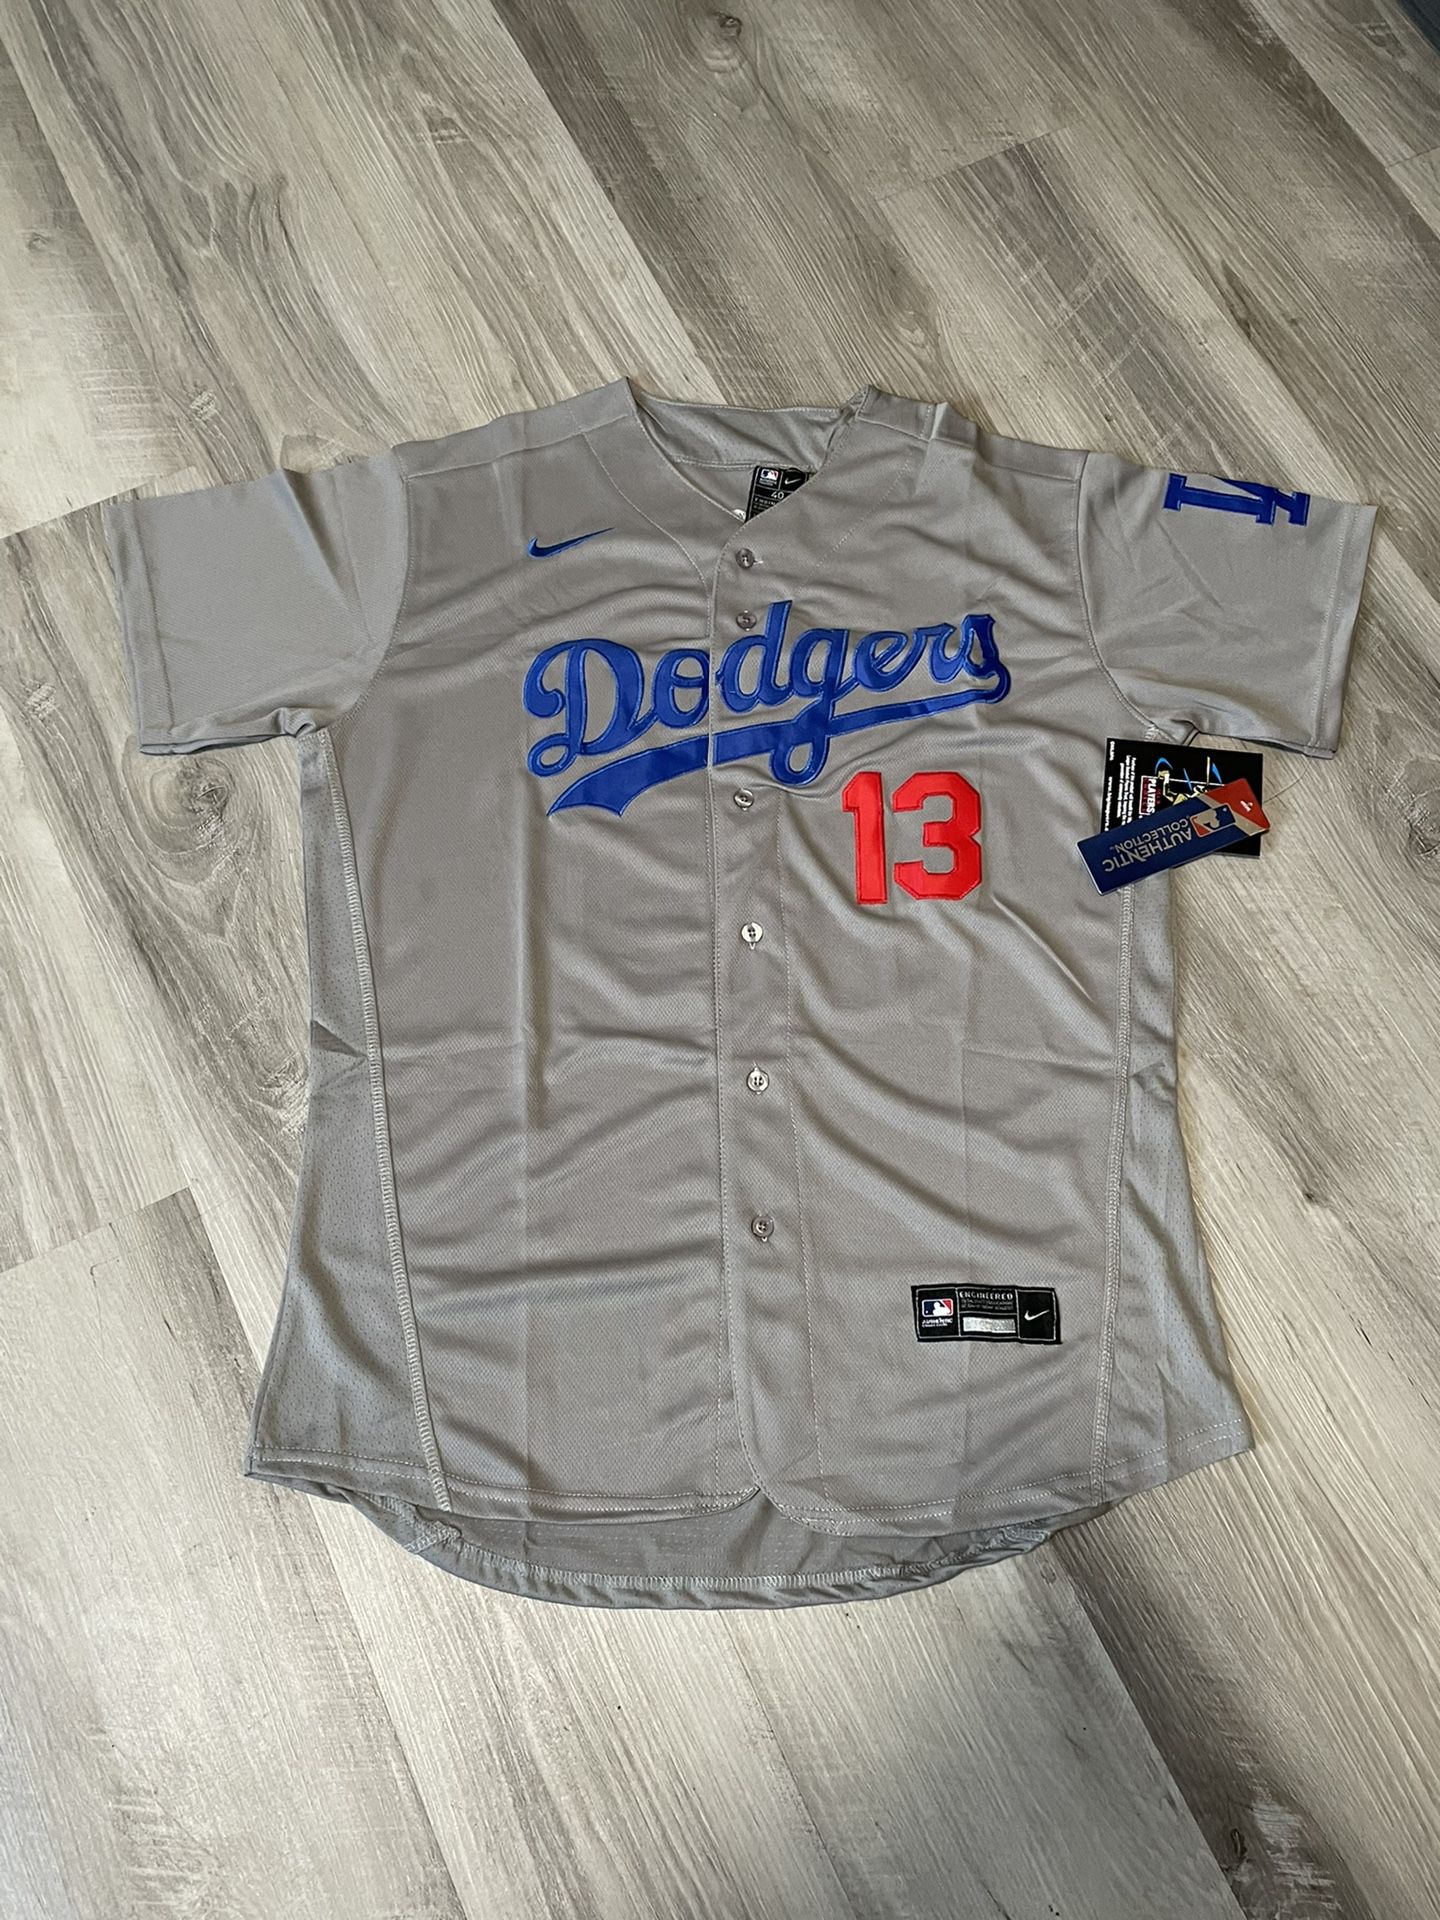 Max Muncy Jersey for Sale in Monrovia, CA - OfferUp